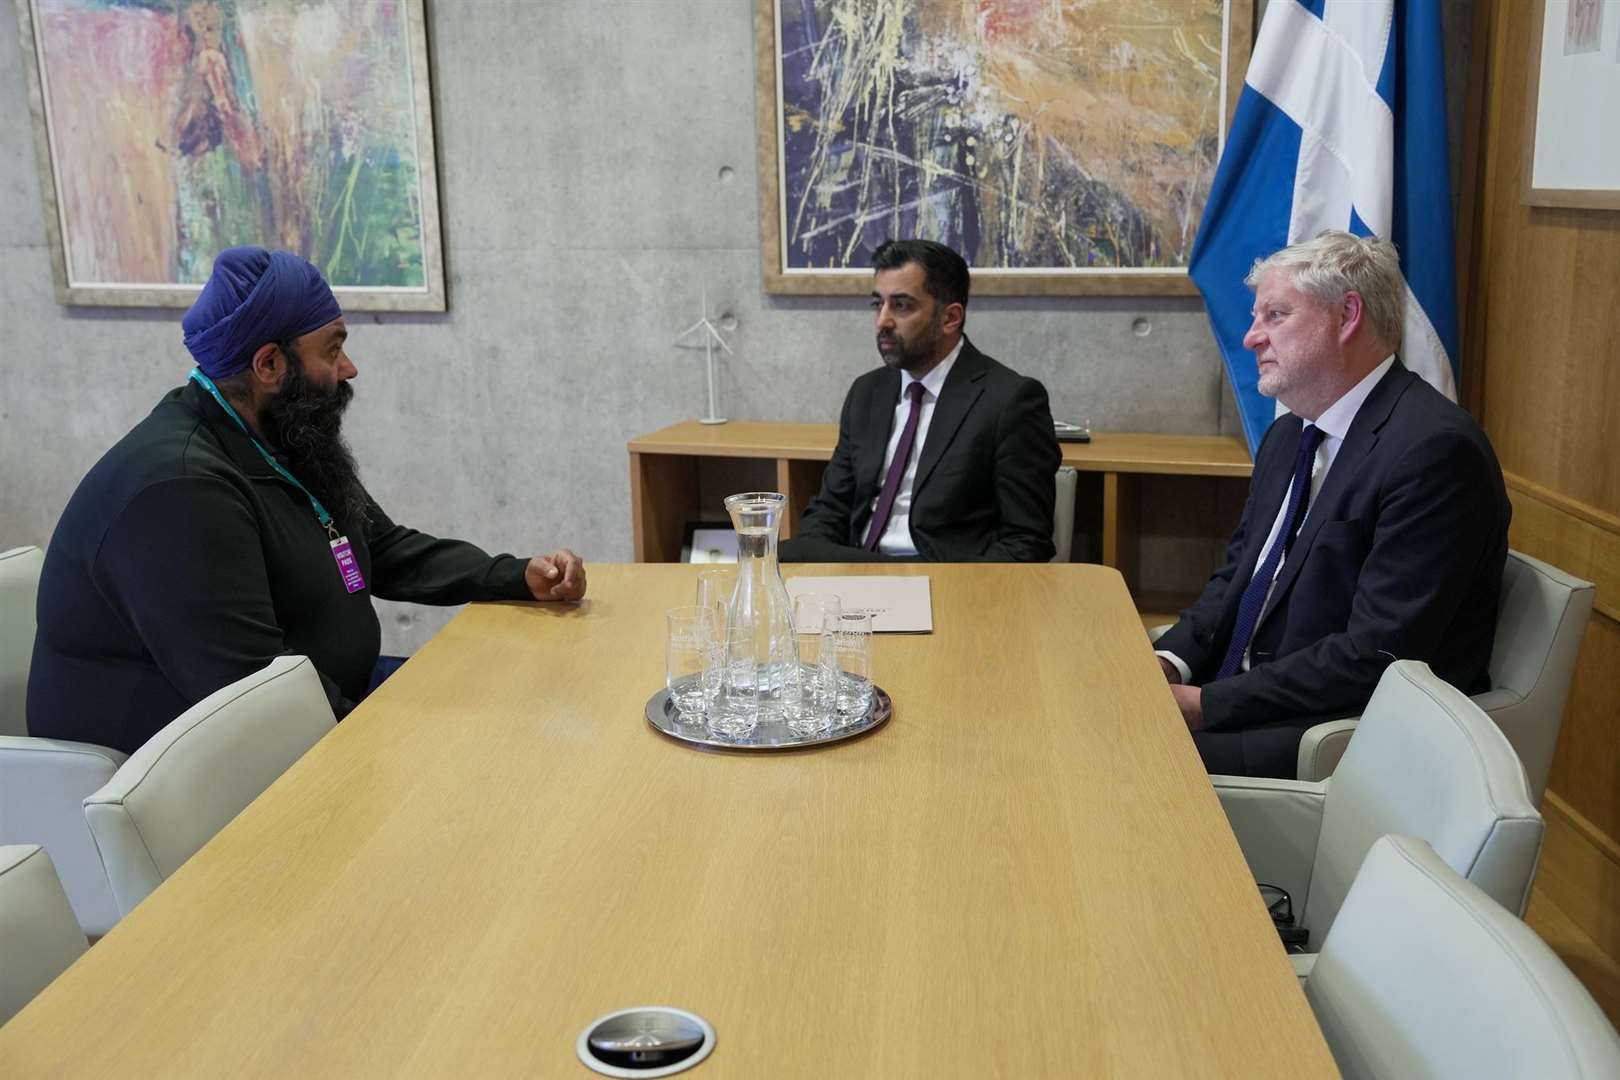 Scotland’s First Minister Humza Yousaf meets with Gurpreet Singh Johal, brother of Jagtar Singh Johal, at the Scottish Parliament on Tuesday afternoon (Scottish Government/PA)